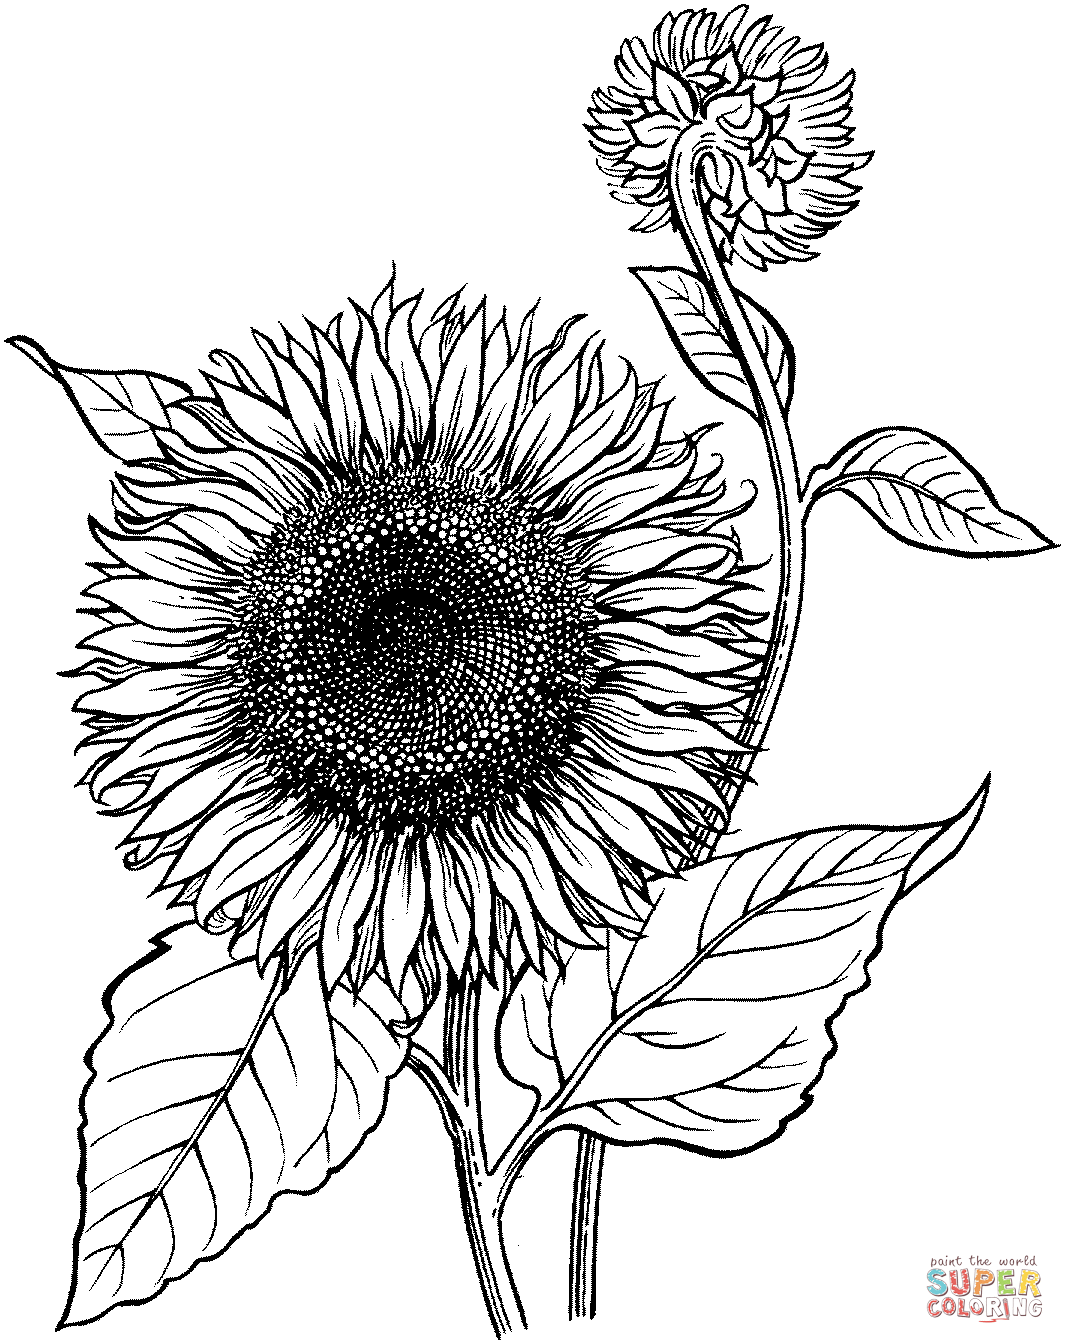 Blooming Sunflower Coloring page | Free Printable Coloring Pages